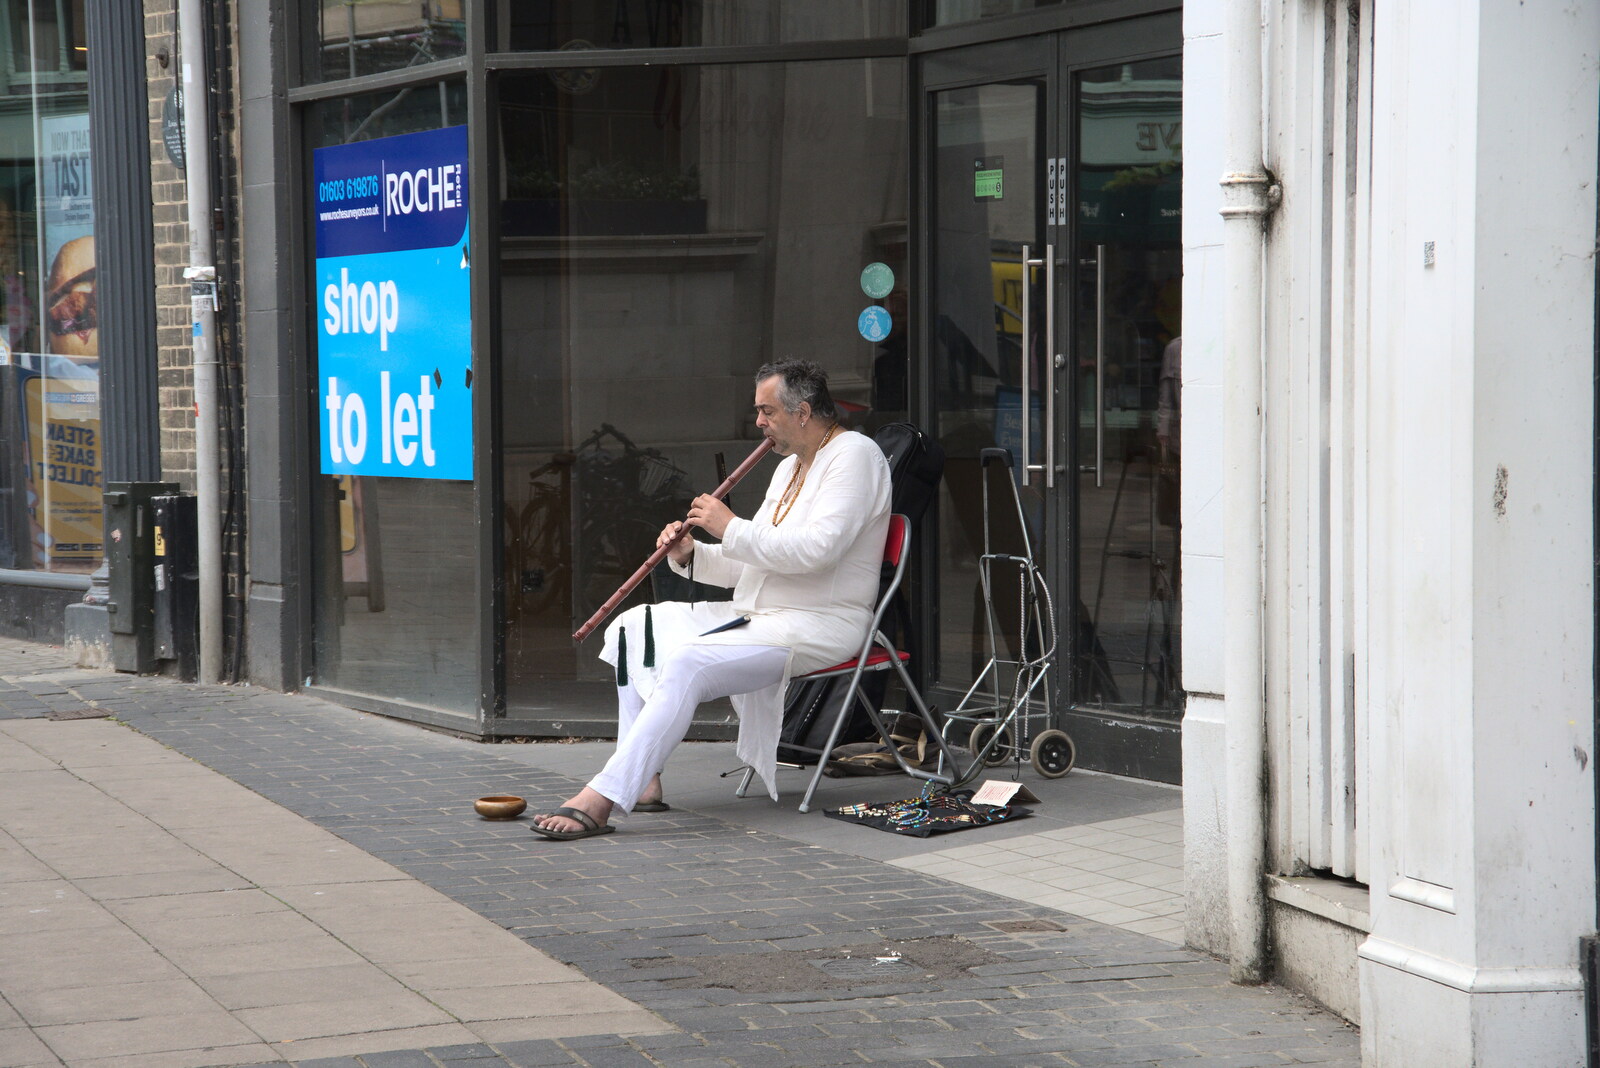 Some dude plays recorder on London Street from Discovering the Hidden City: Norwich, Norfolk - 23rd May 2022